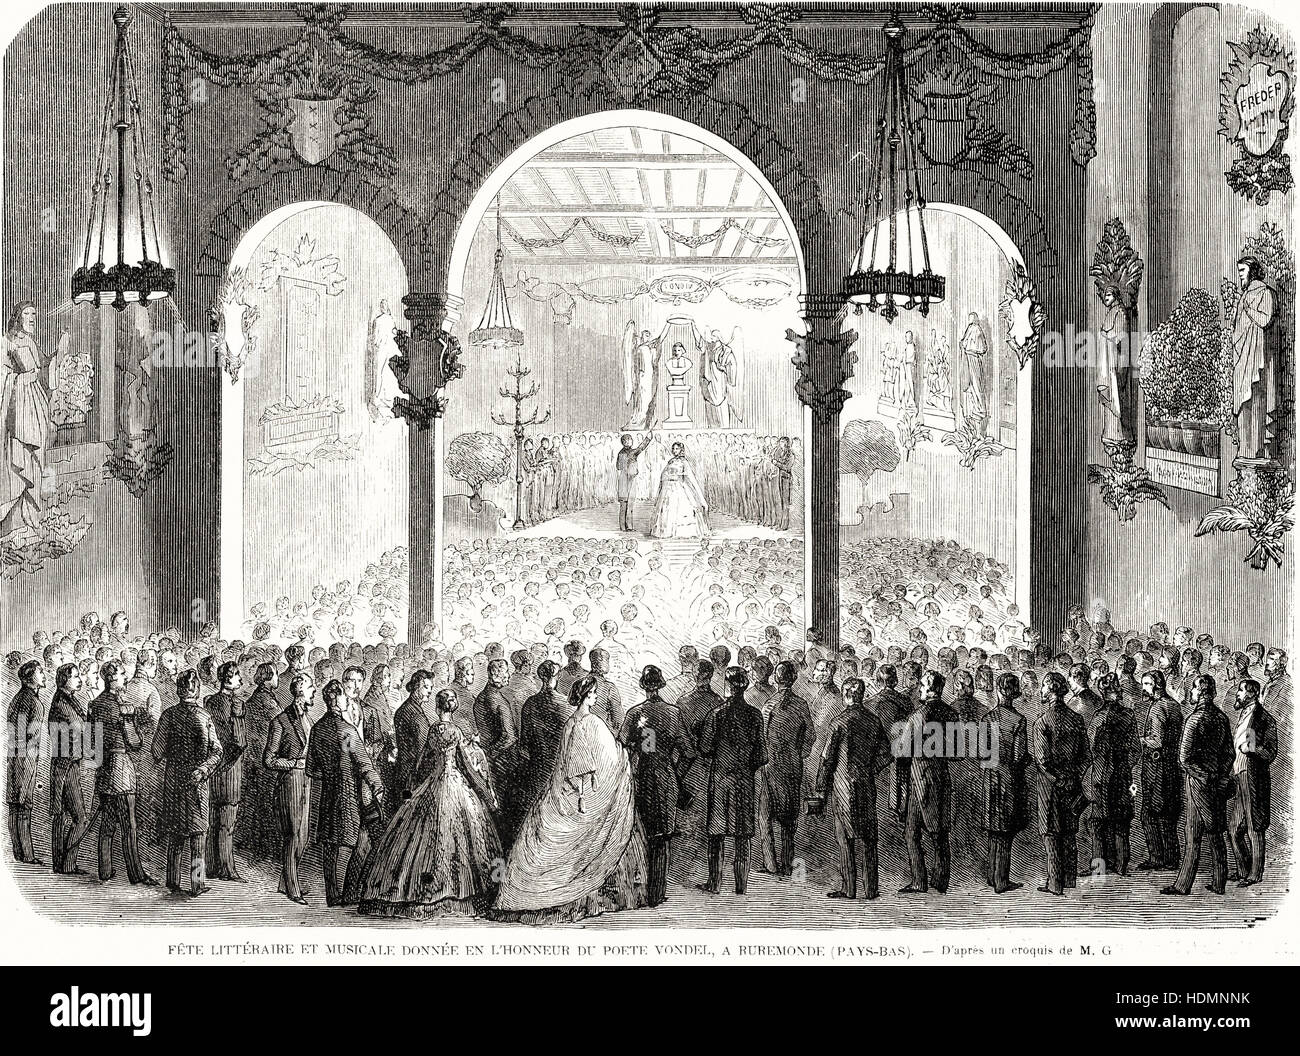 L'Illustration 1862 engraving Literary and musical festival given in honor of the poet Vondel in Roermond (Netherlands) Stock Photo